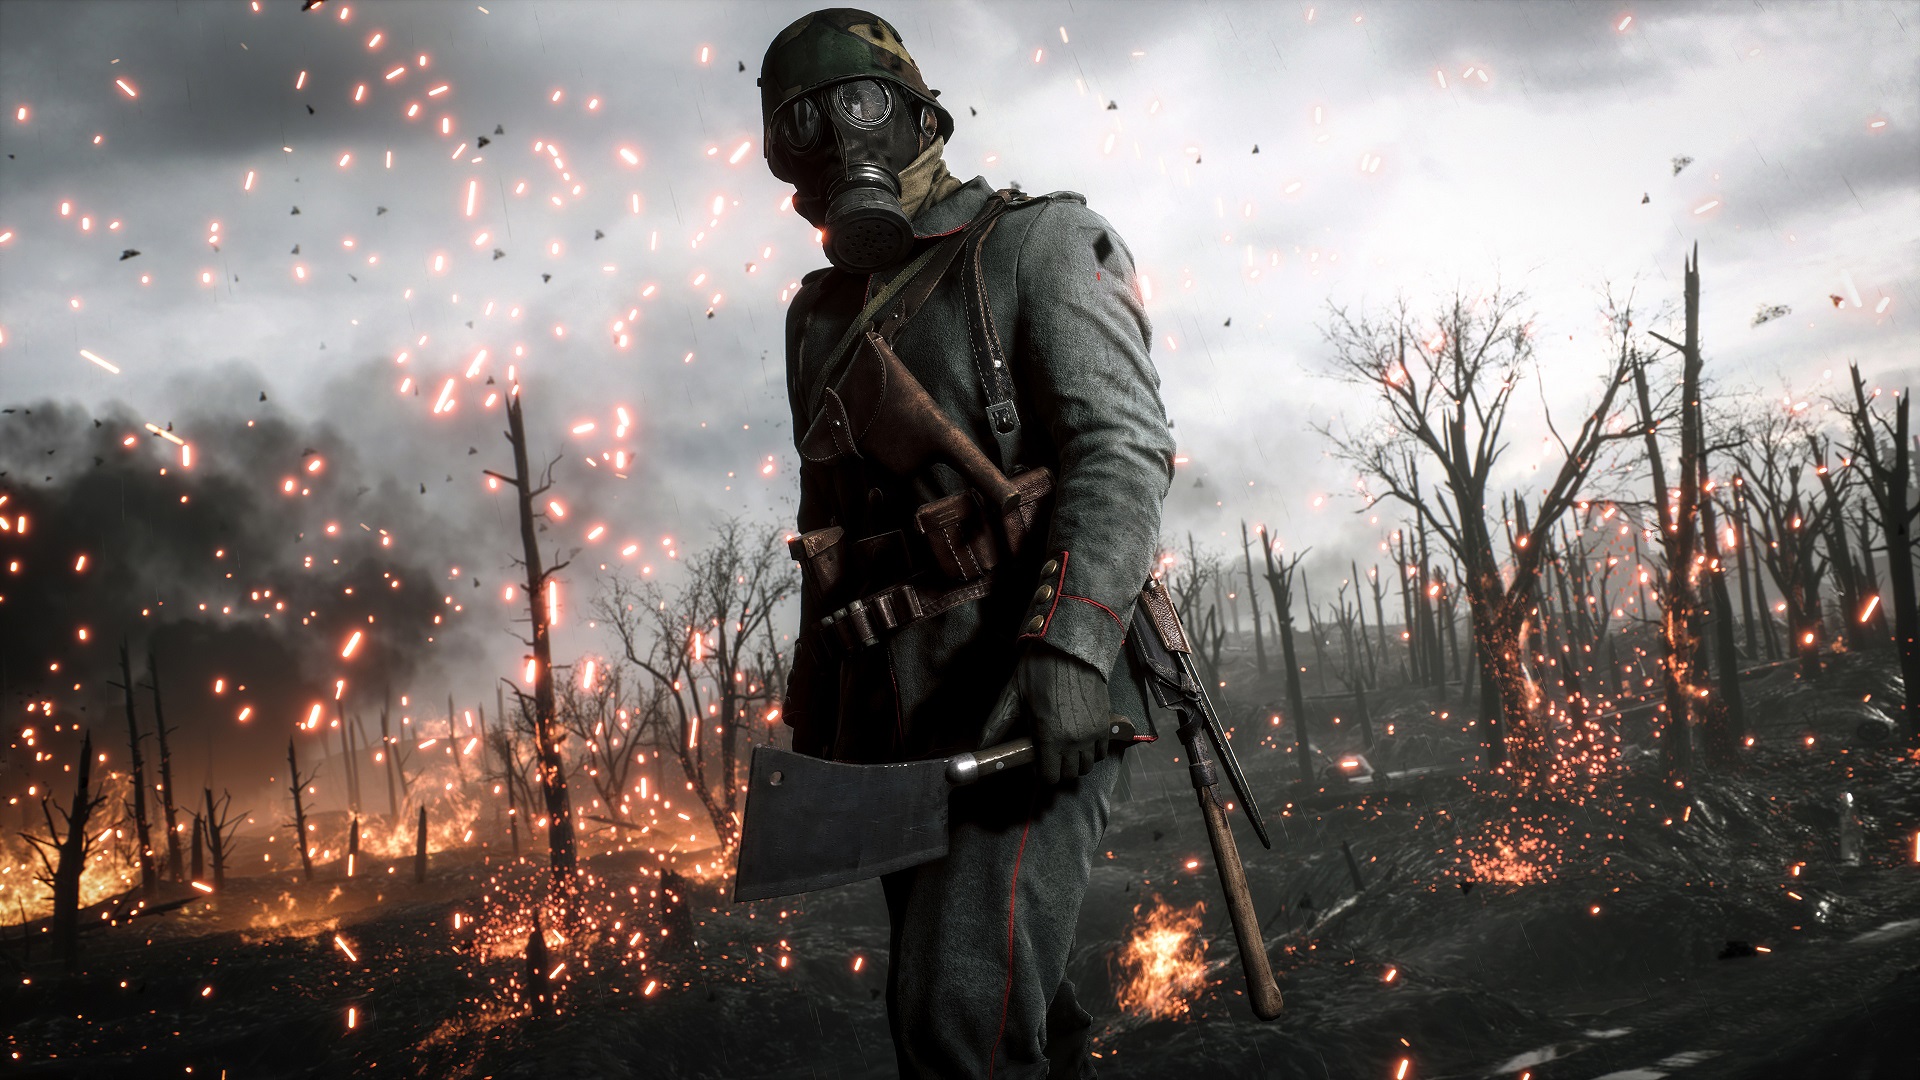 Players Are Returning To Battlefield 1, Beating 2042 With Huge Numbers